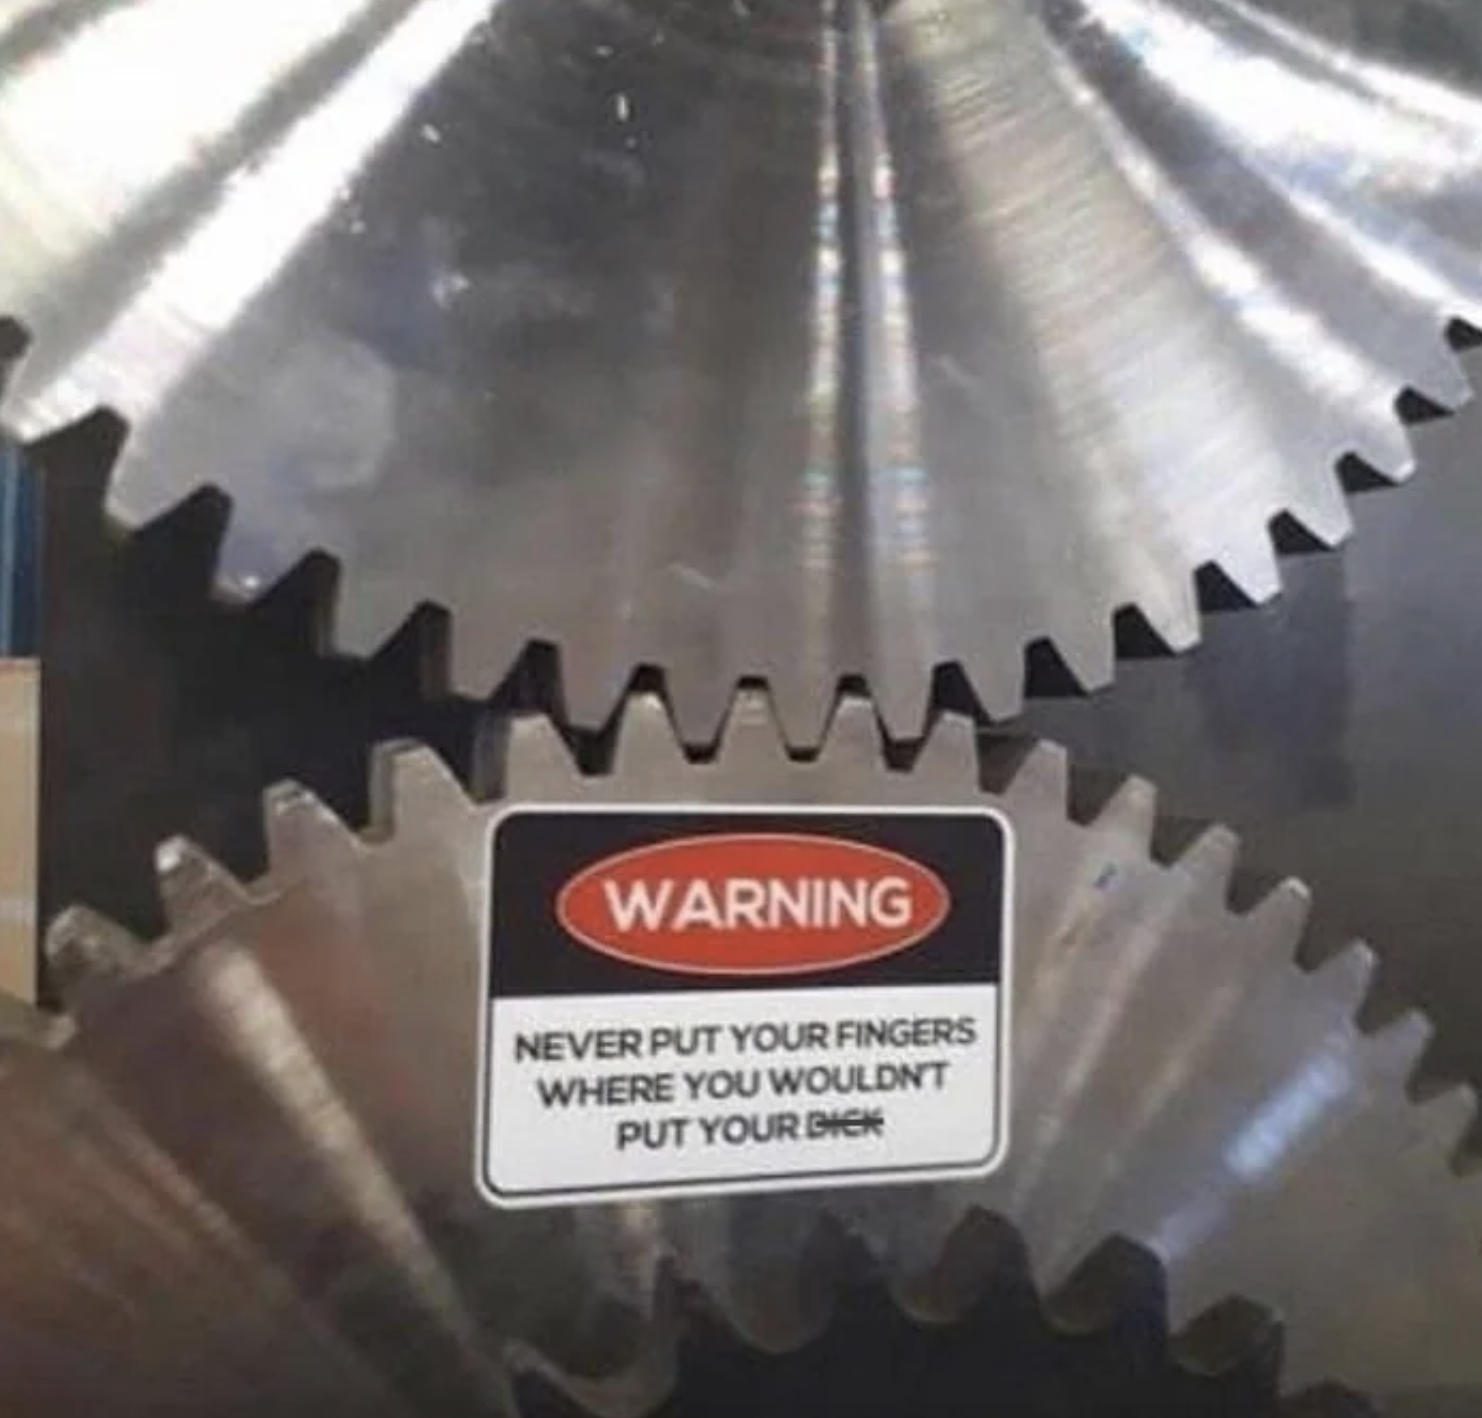 &quot;Warning: Never put your fingers where you wouldn&#x27;t put your dick&quot; (with rotating metal blades)